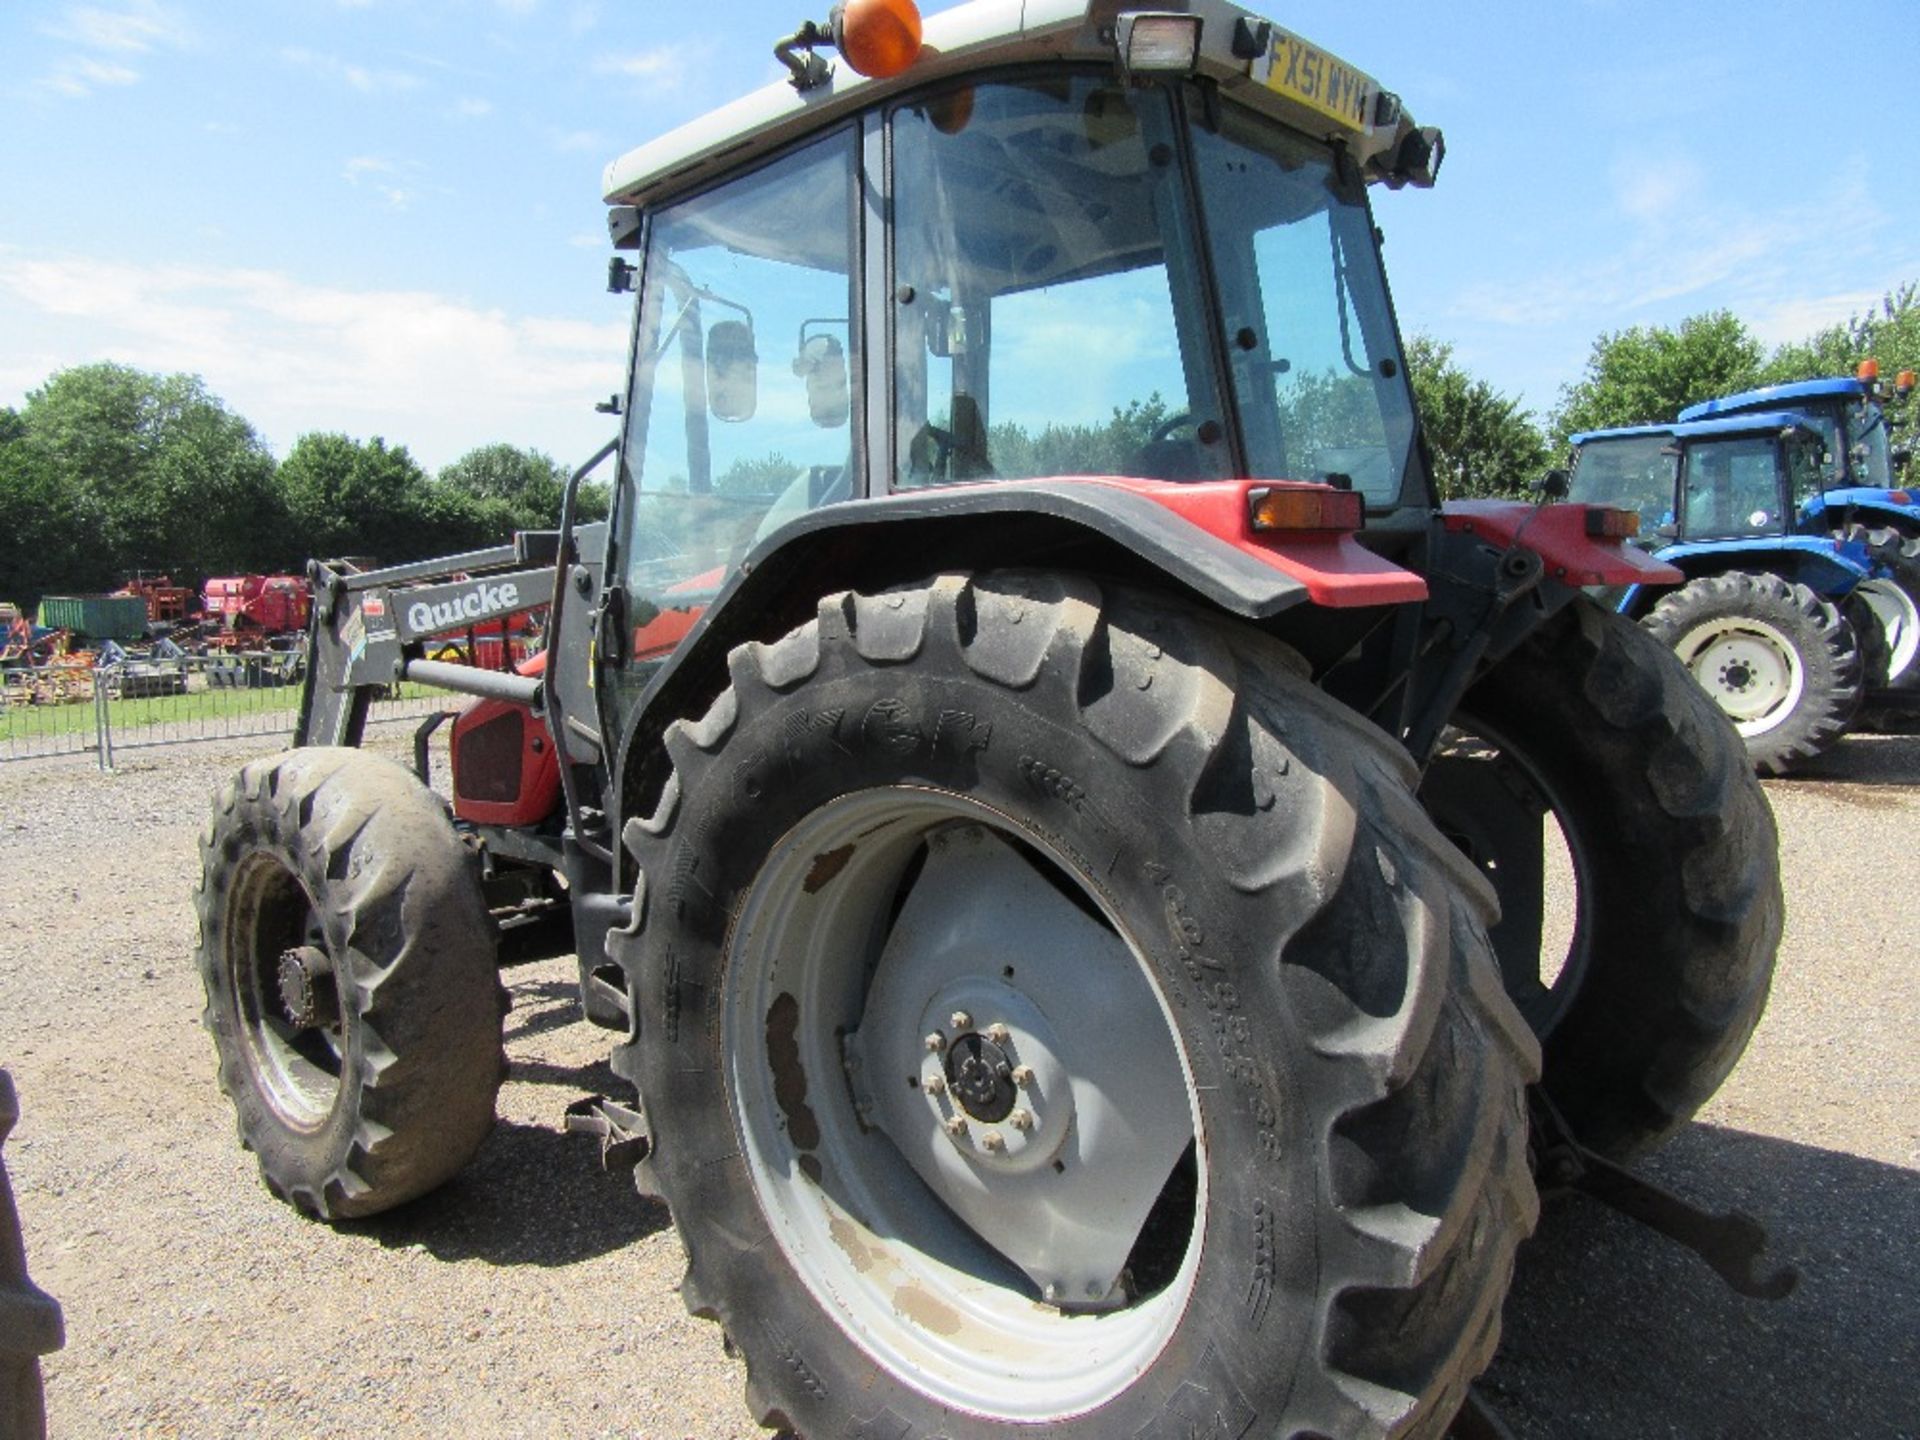 2001 Massey Ferguson 4355 Tractor With Quickie Loader. 4340 hrs. V5 will be supplied. Reg.No. FX51 - Image 7 of 13